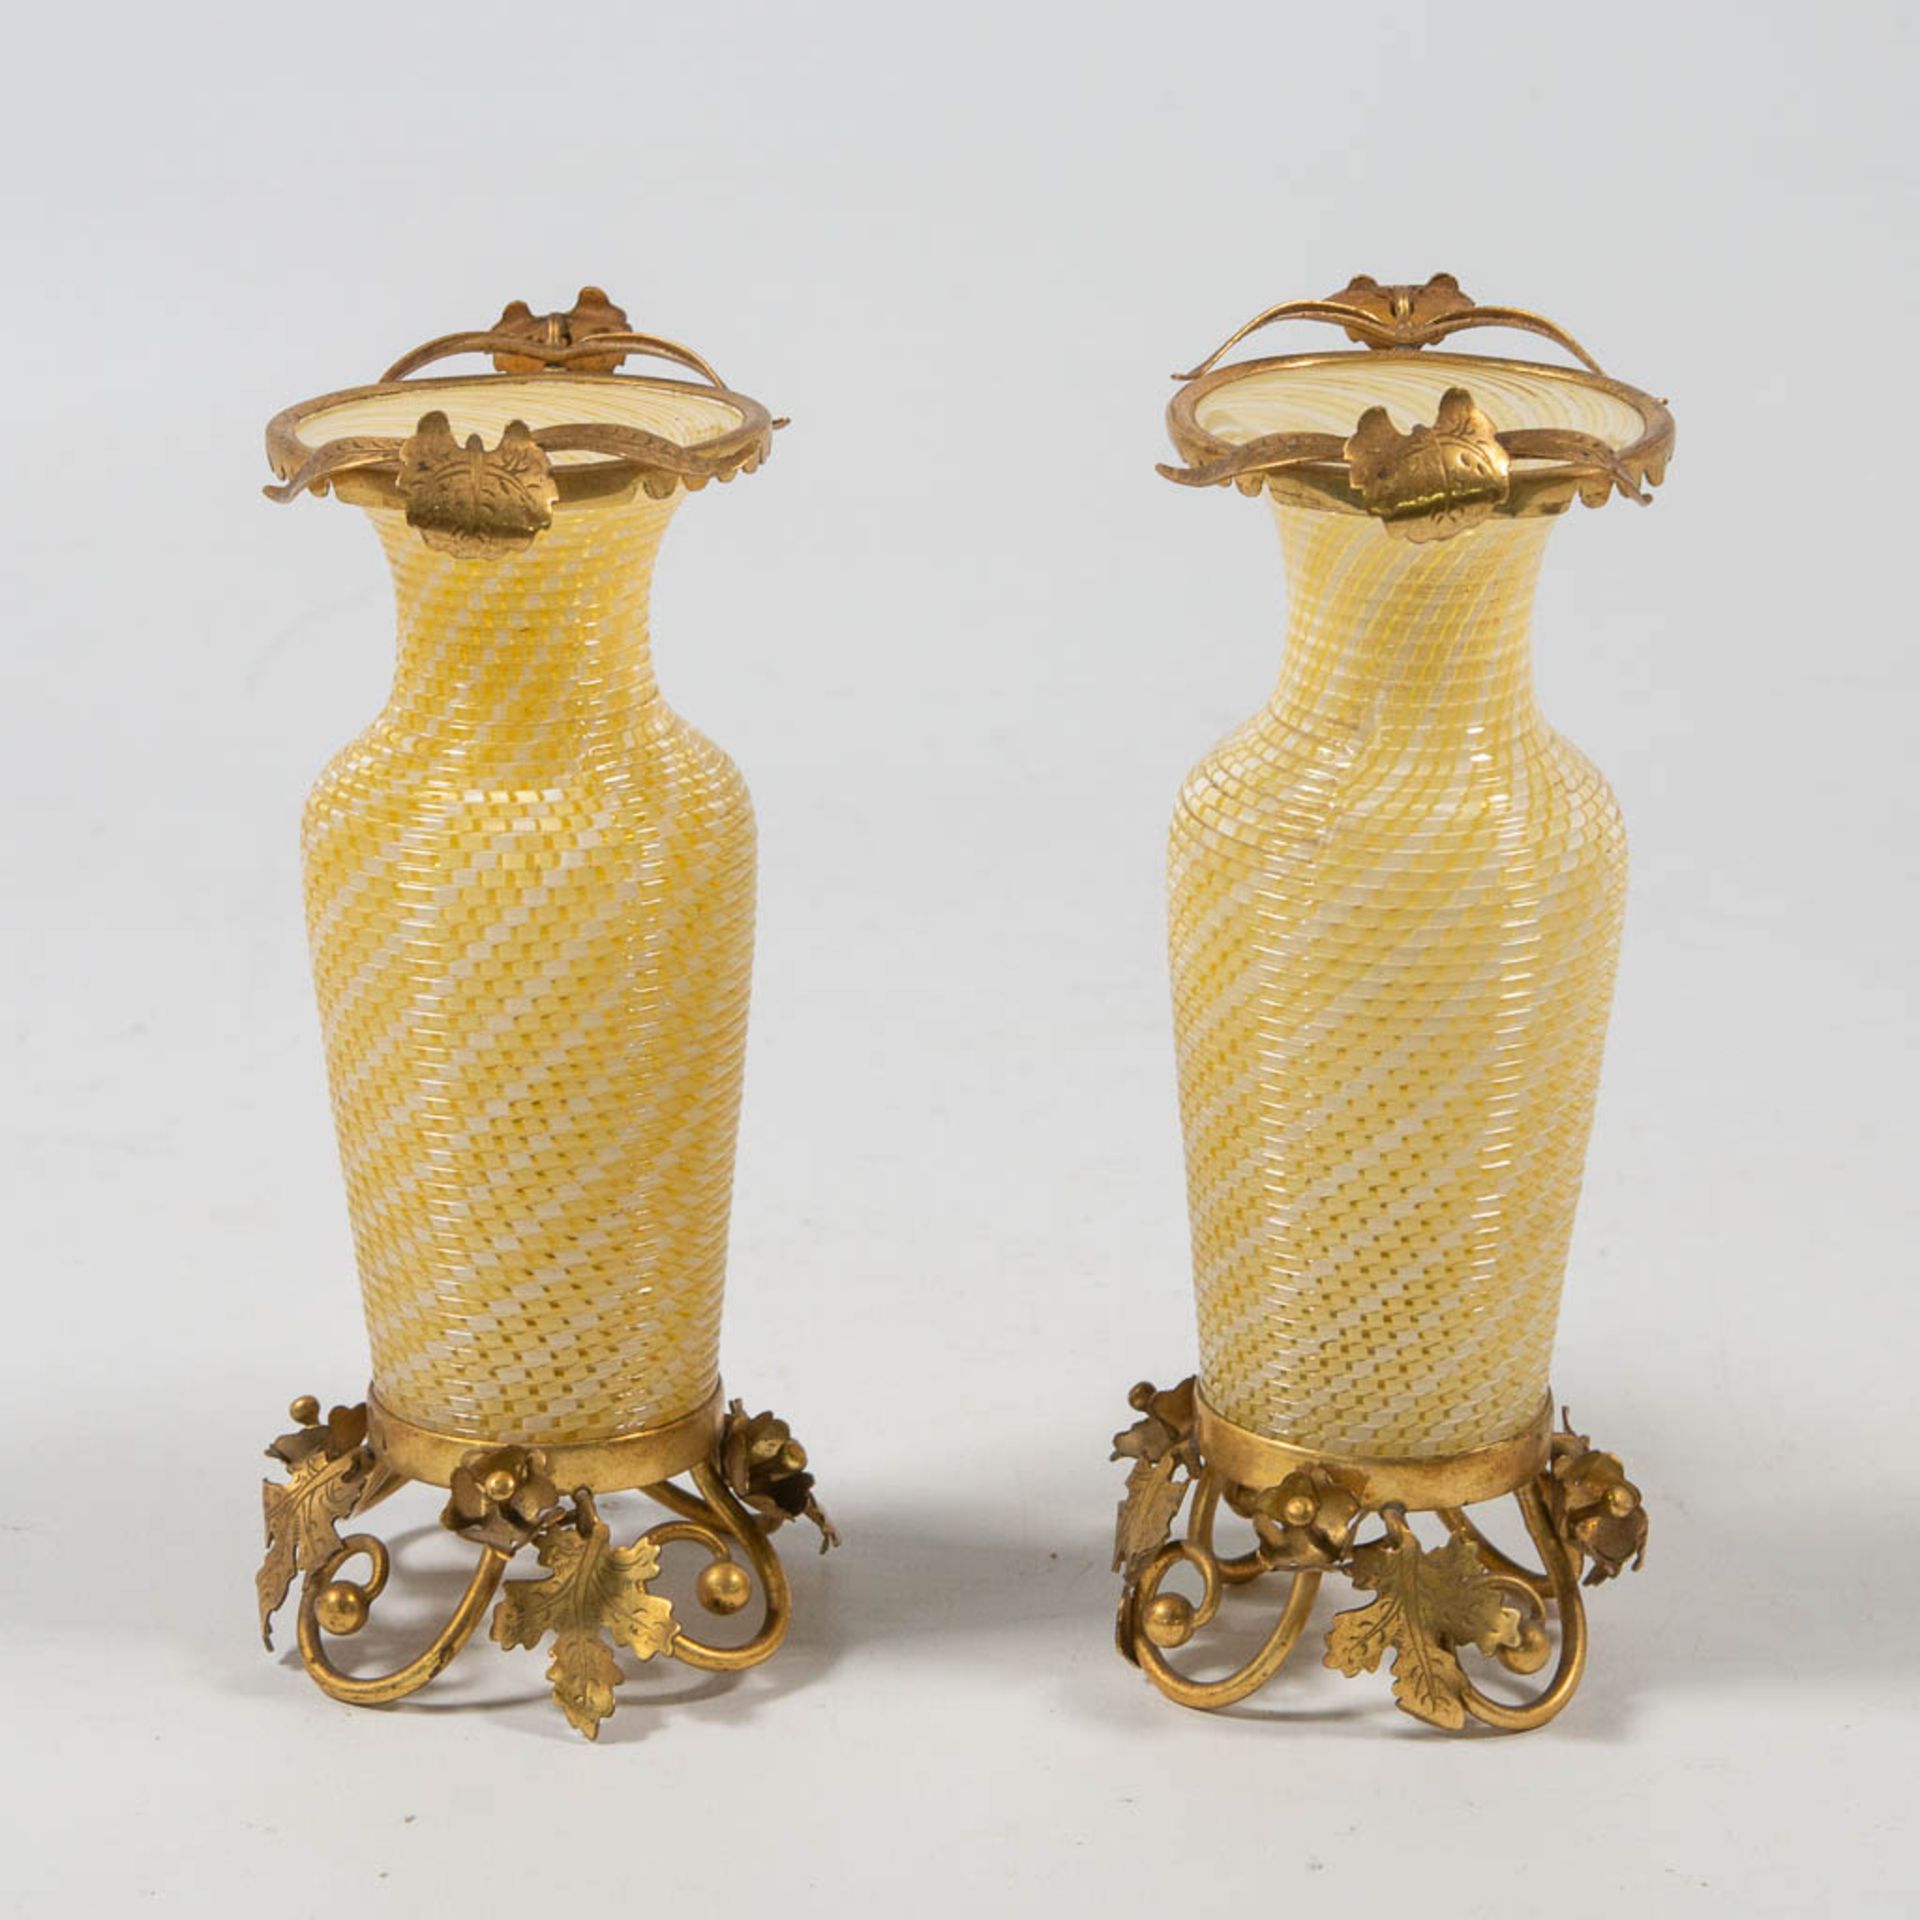 A pair of vases made of glass and mounted with bronze, made in Murano, Italy around 1900. (16 x 6,5 - Image 6 of 13